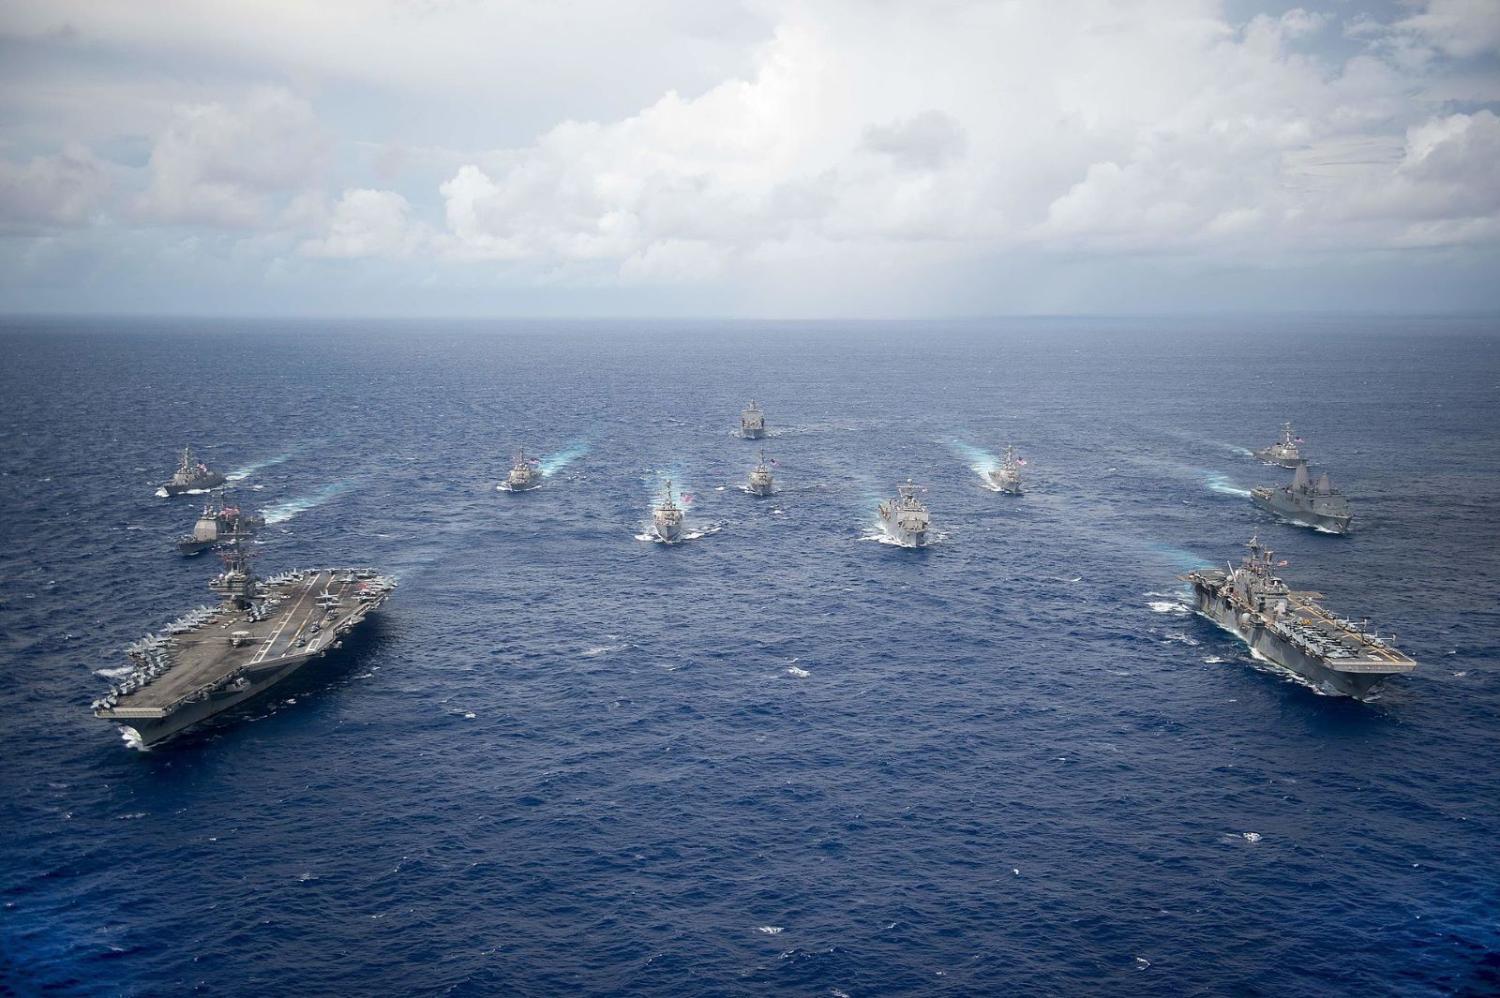 USS Ronald Reagan leads Carrier Strike Group Five and Expeditionary Strike Group Seven ships in an exercise in 2016. (Photo: US Navy/Creative Commons)